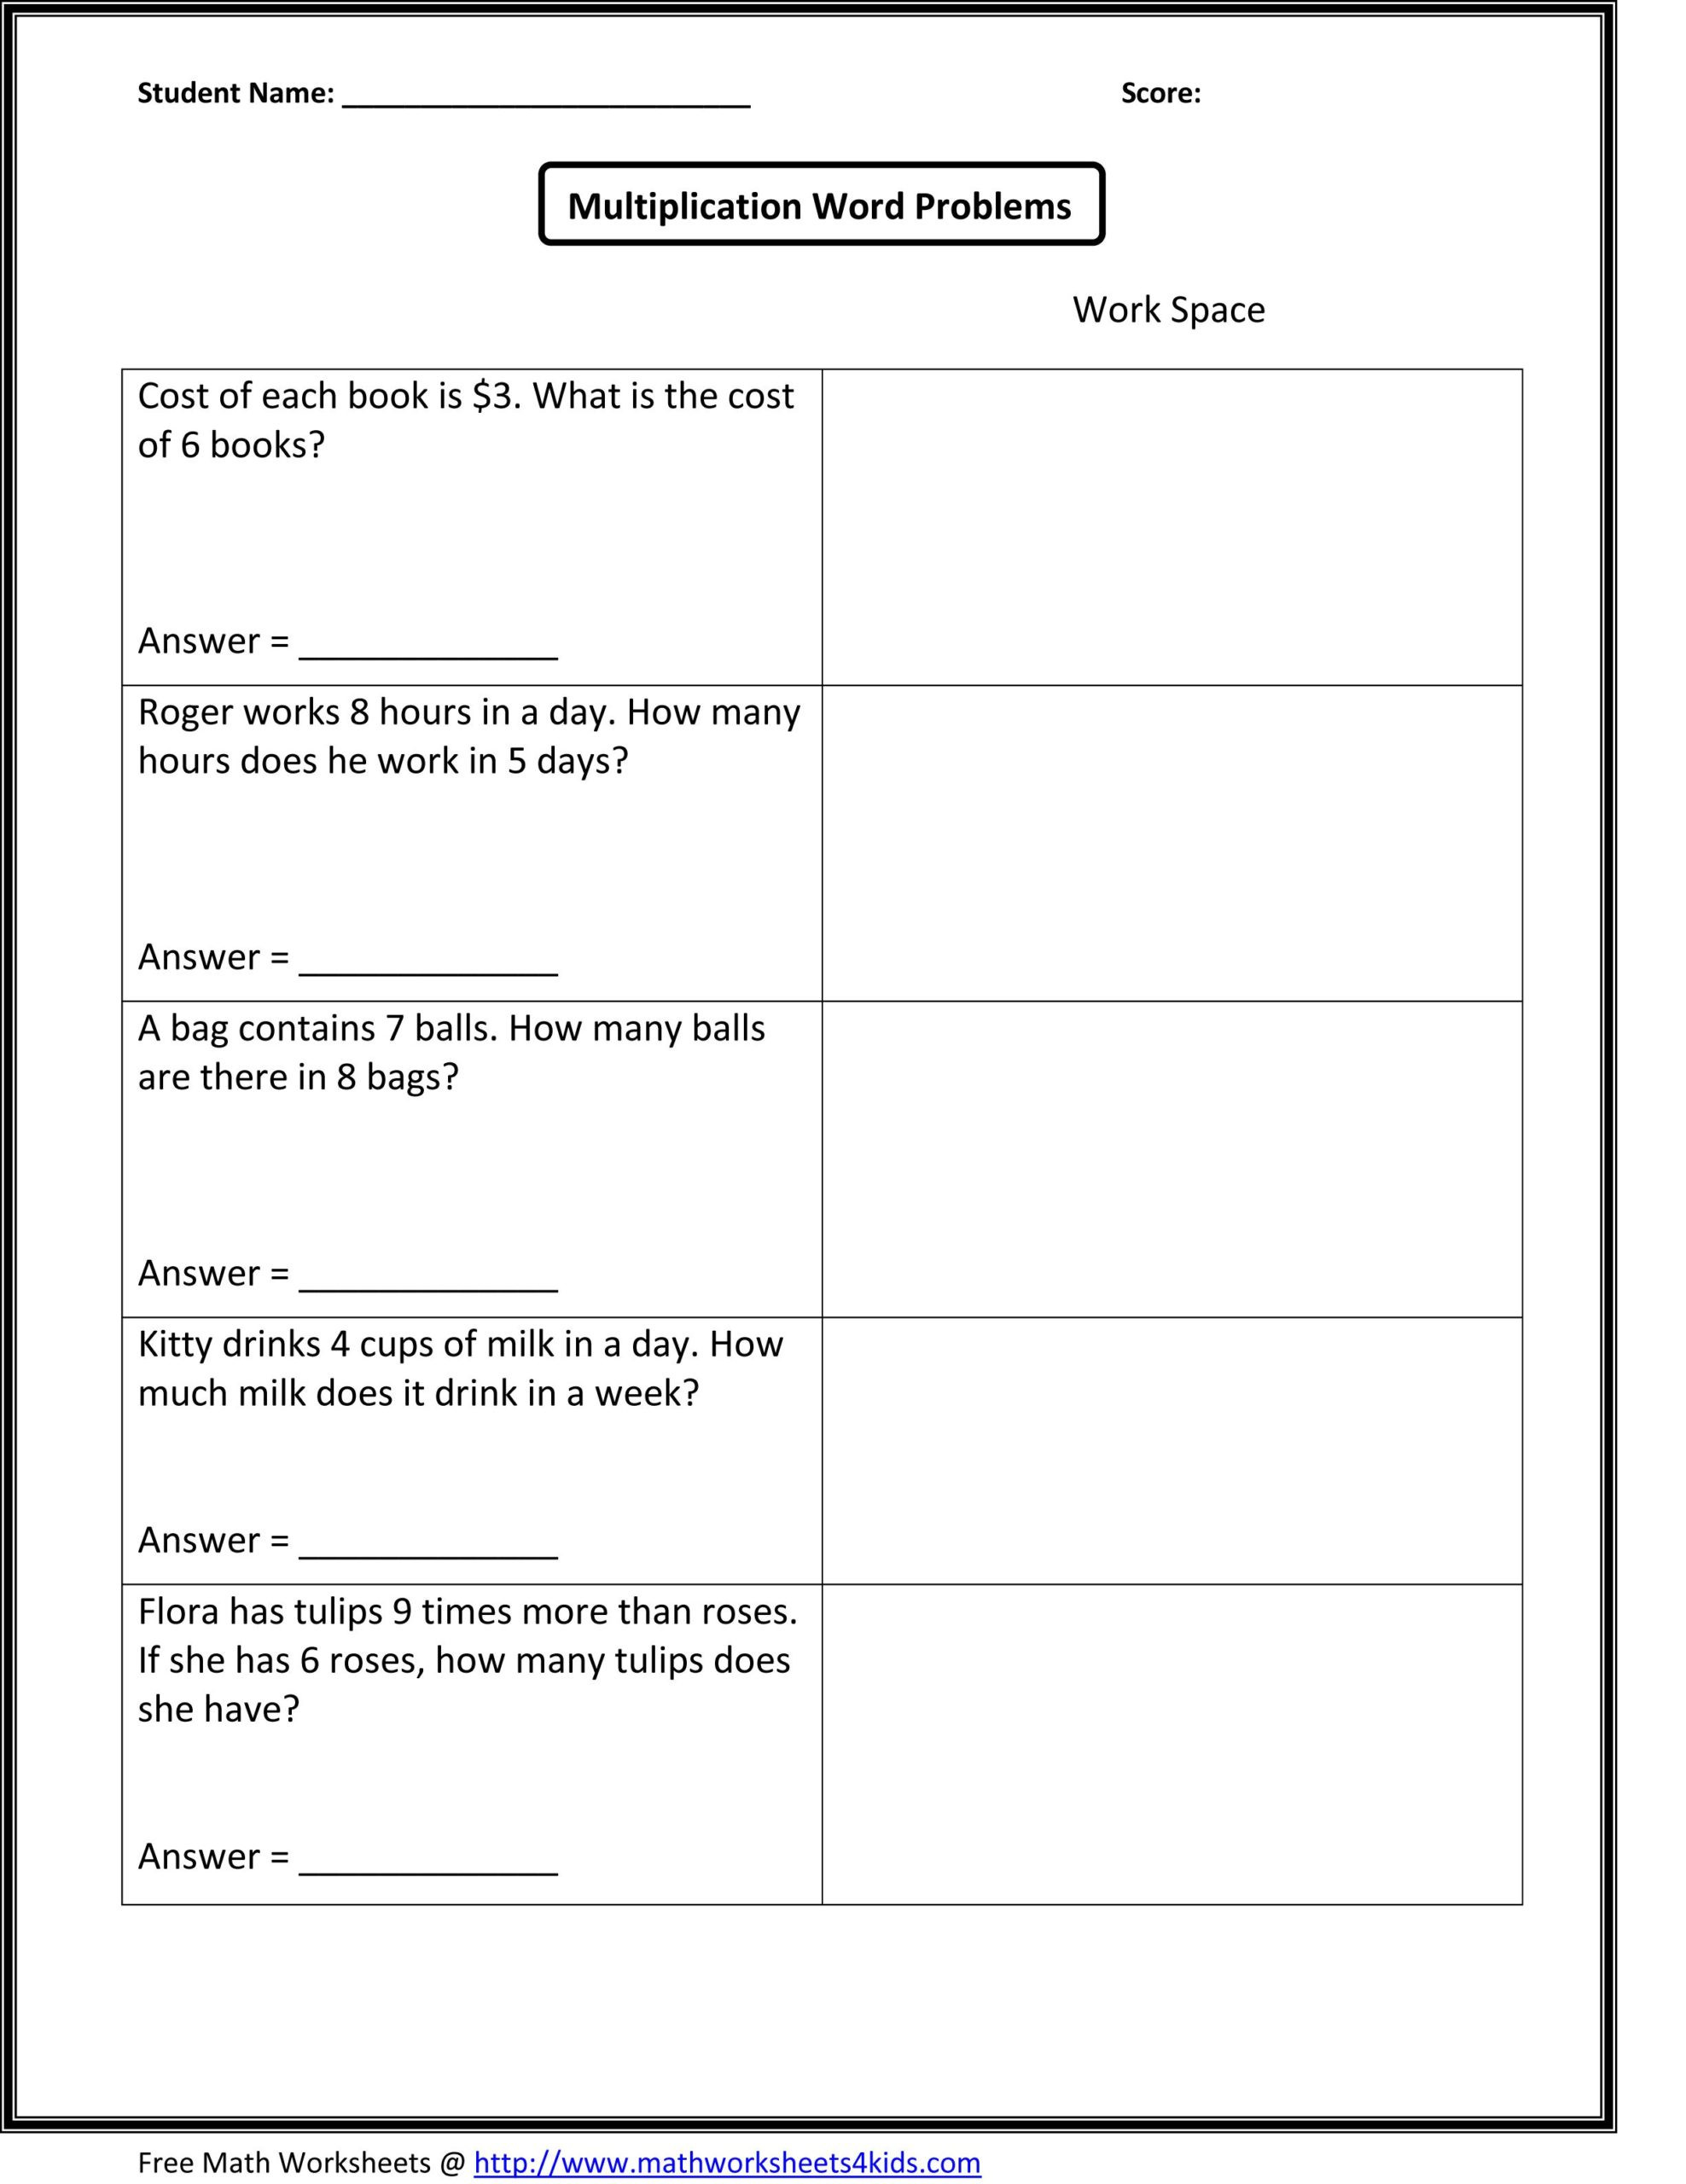 Linear Word Problems Worksheet Math Worksheets by Grade and Subject Matter with 3rd